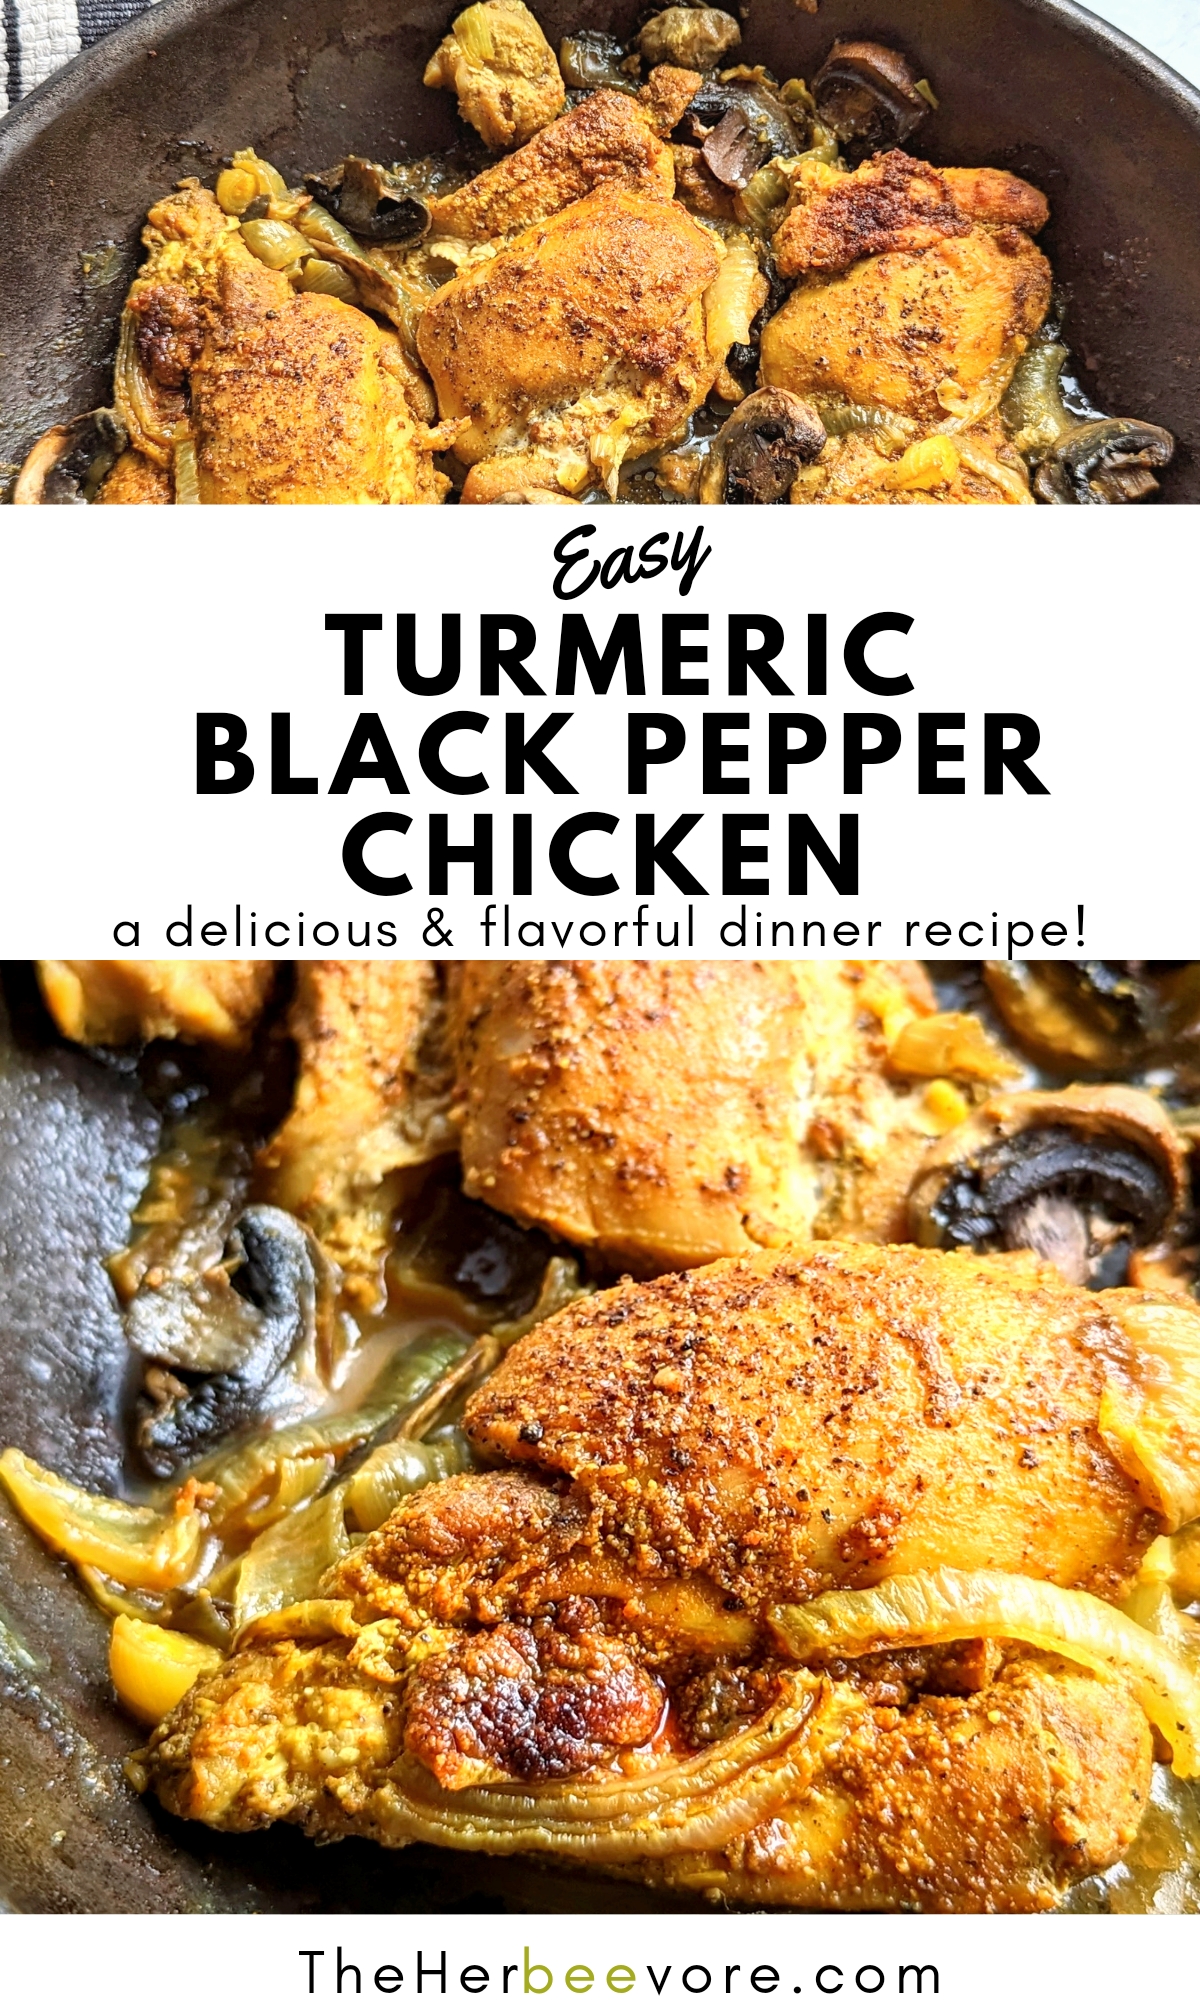 turmeric black pepper chicken recipe easy chicken thigh recipe in cast iron skillet with onions and mushrooms